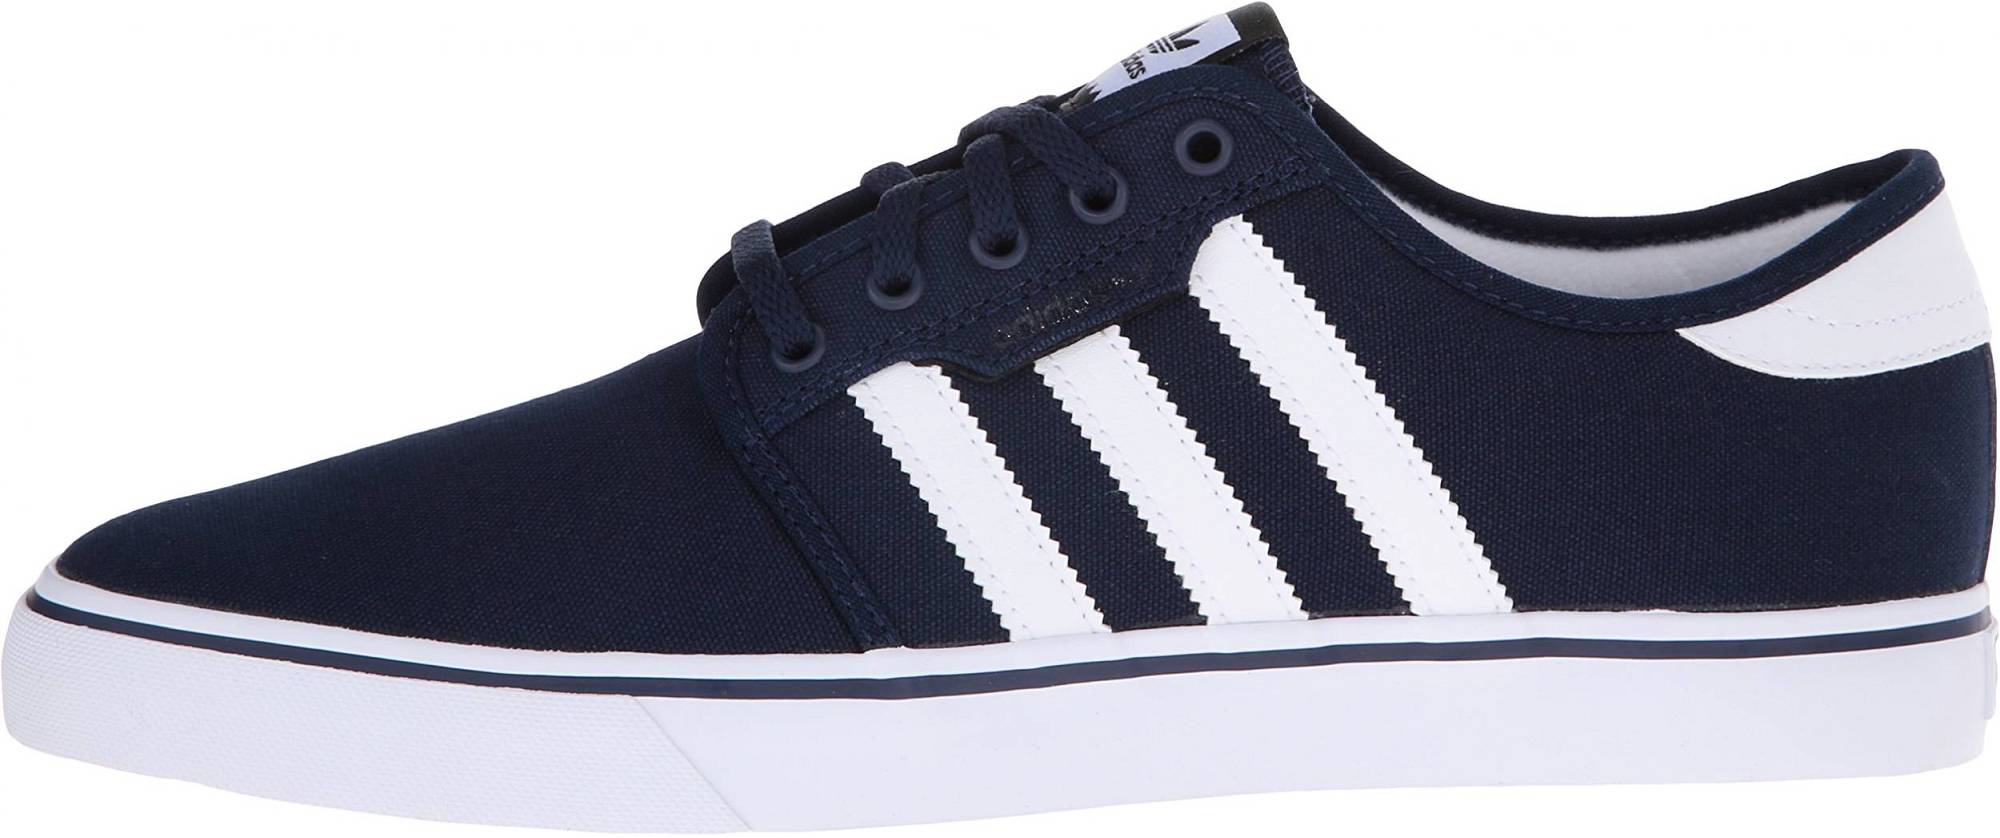 Adidas Seeley – Shoes Reviews & Reasons To Buy